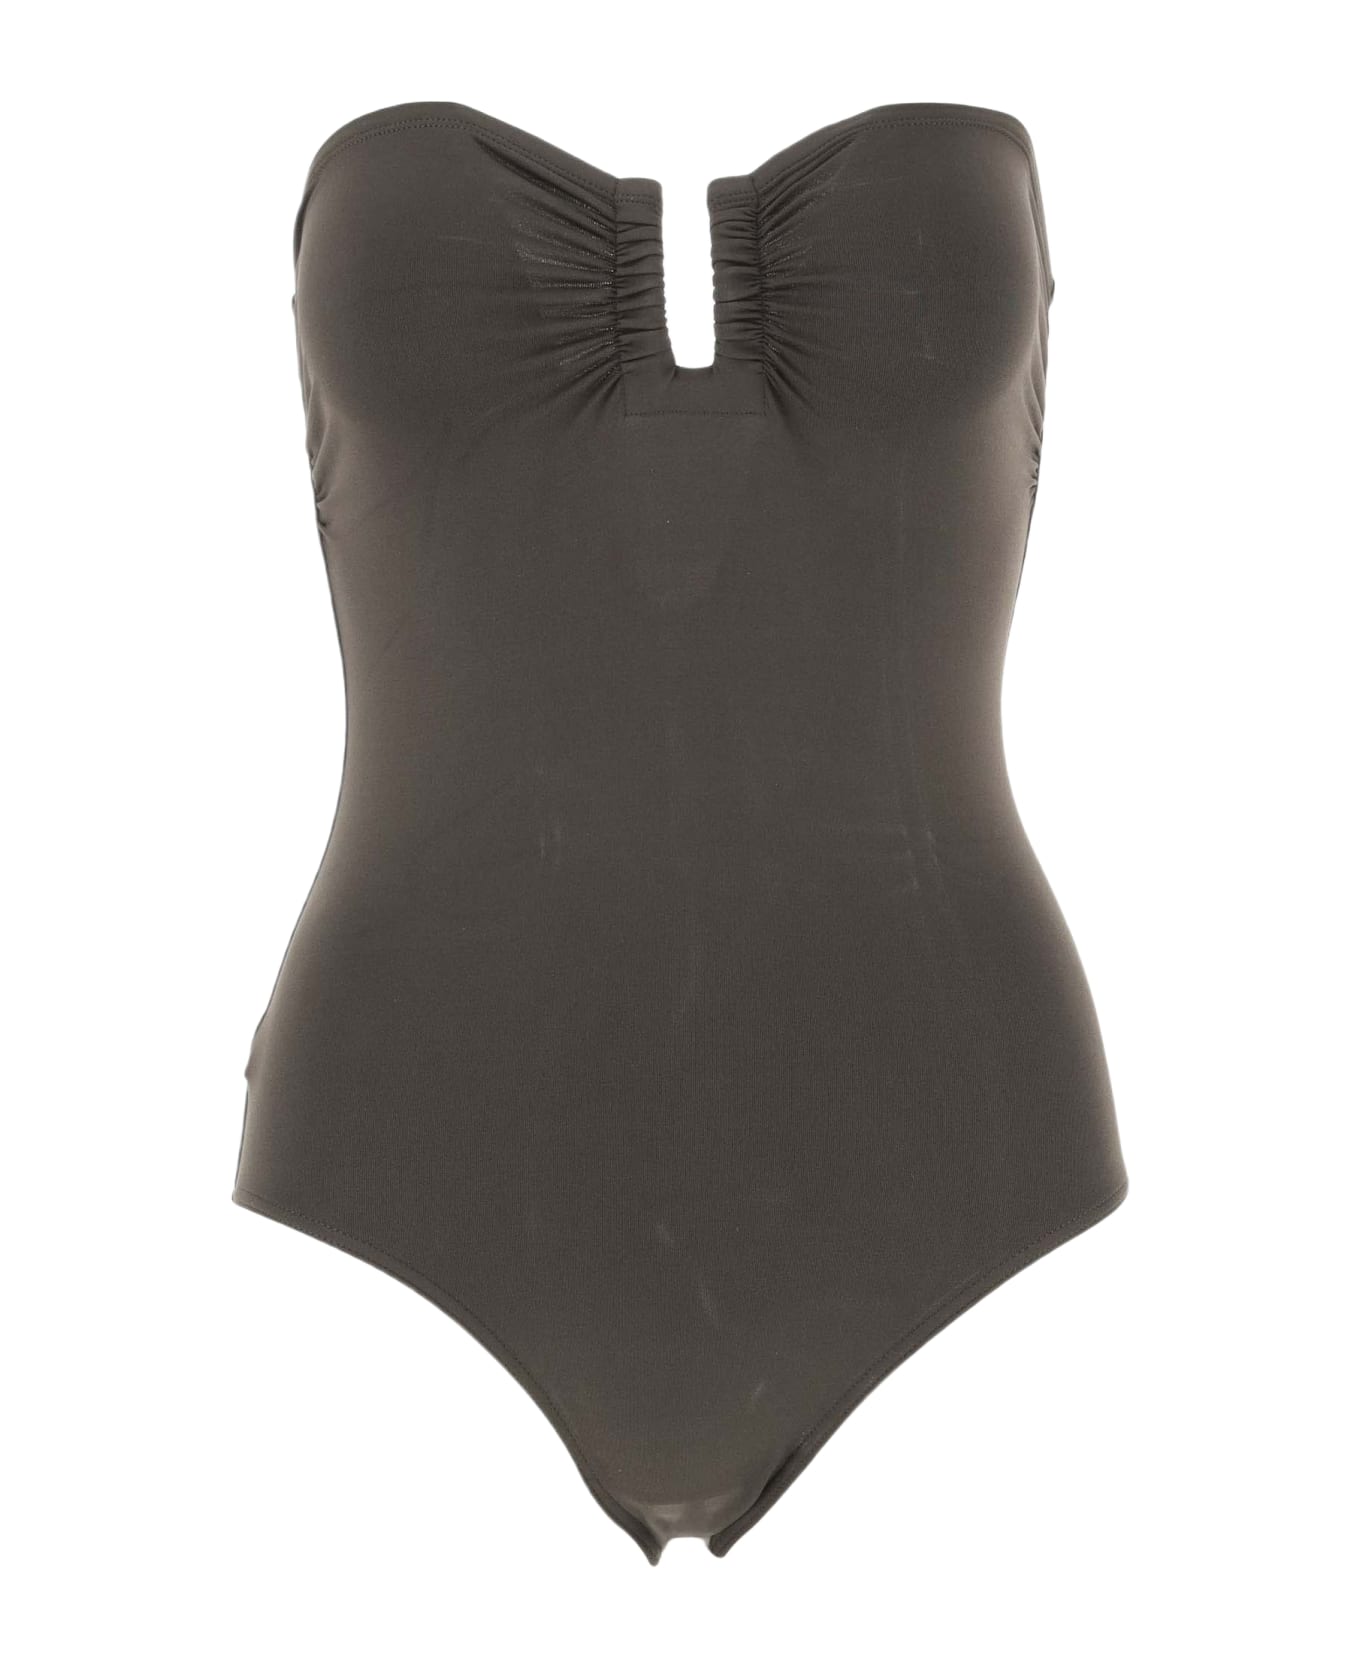 Eres Cassiopee One-piece Swimsuit - Brown 水着